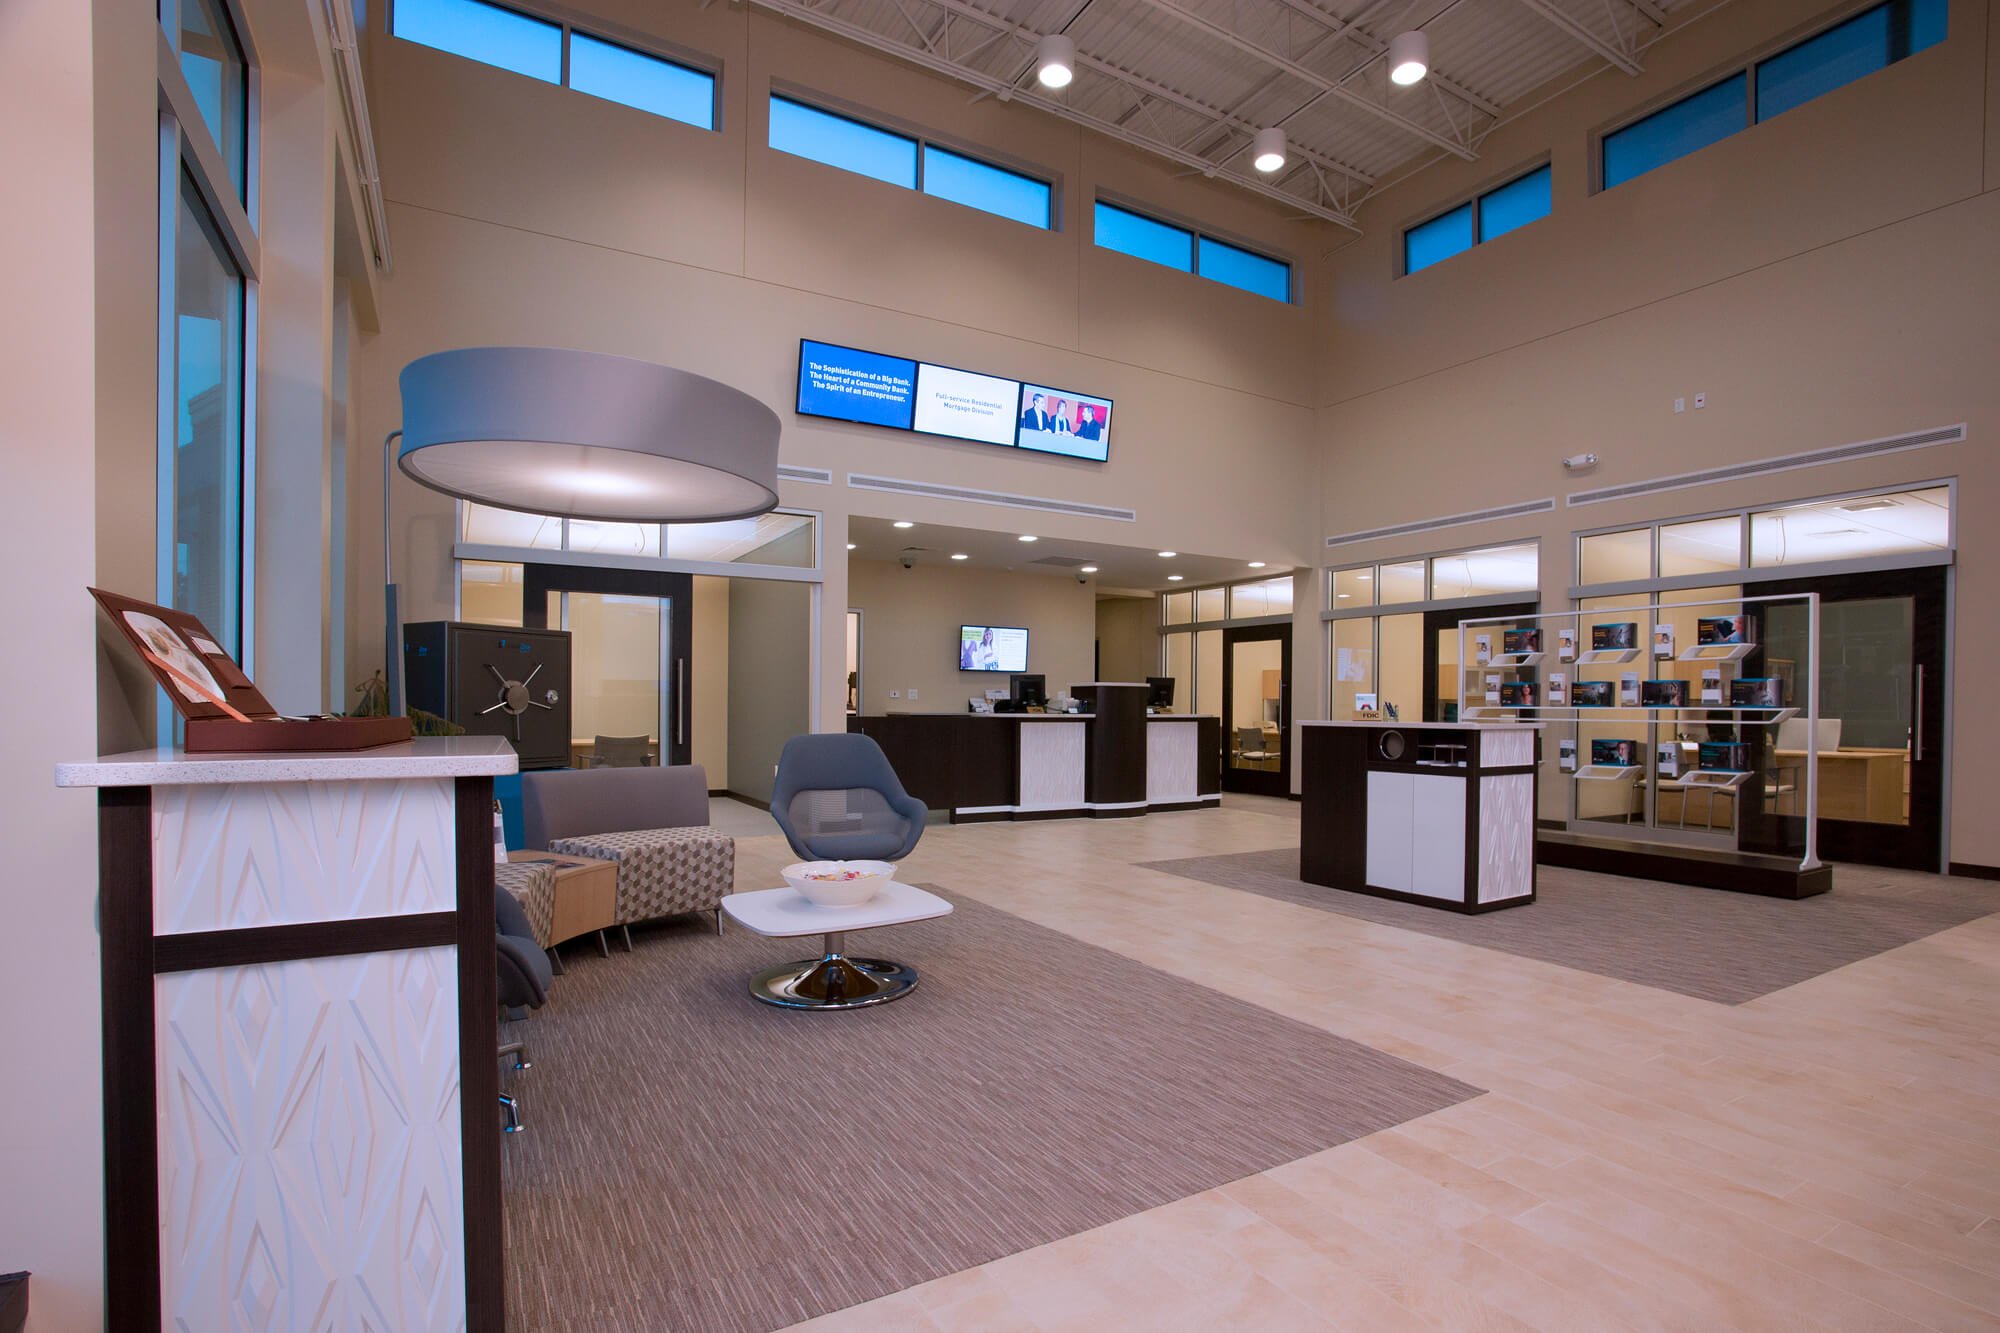 View of the lobby in a bank